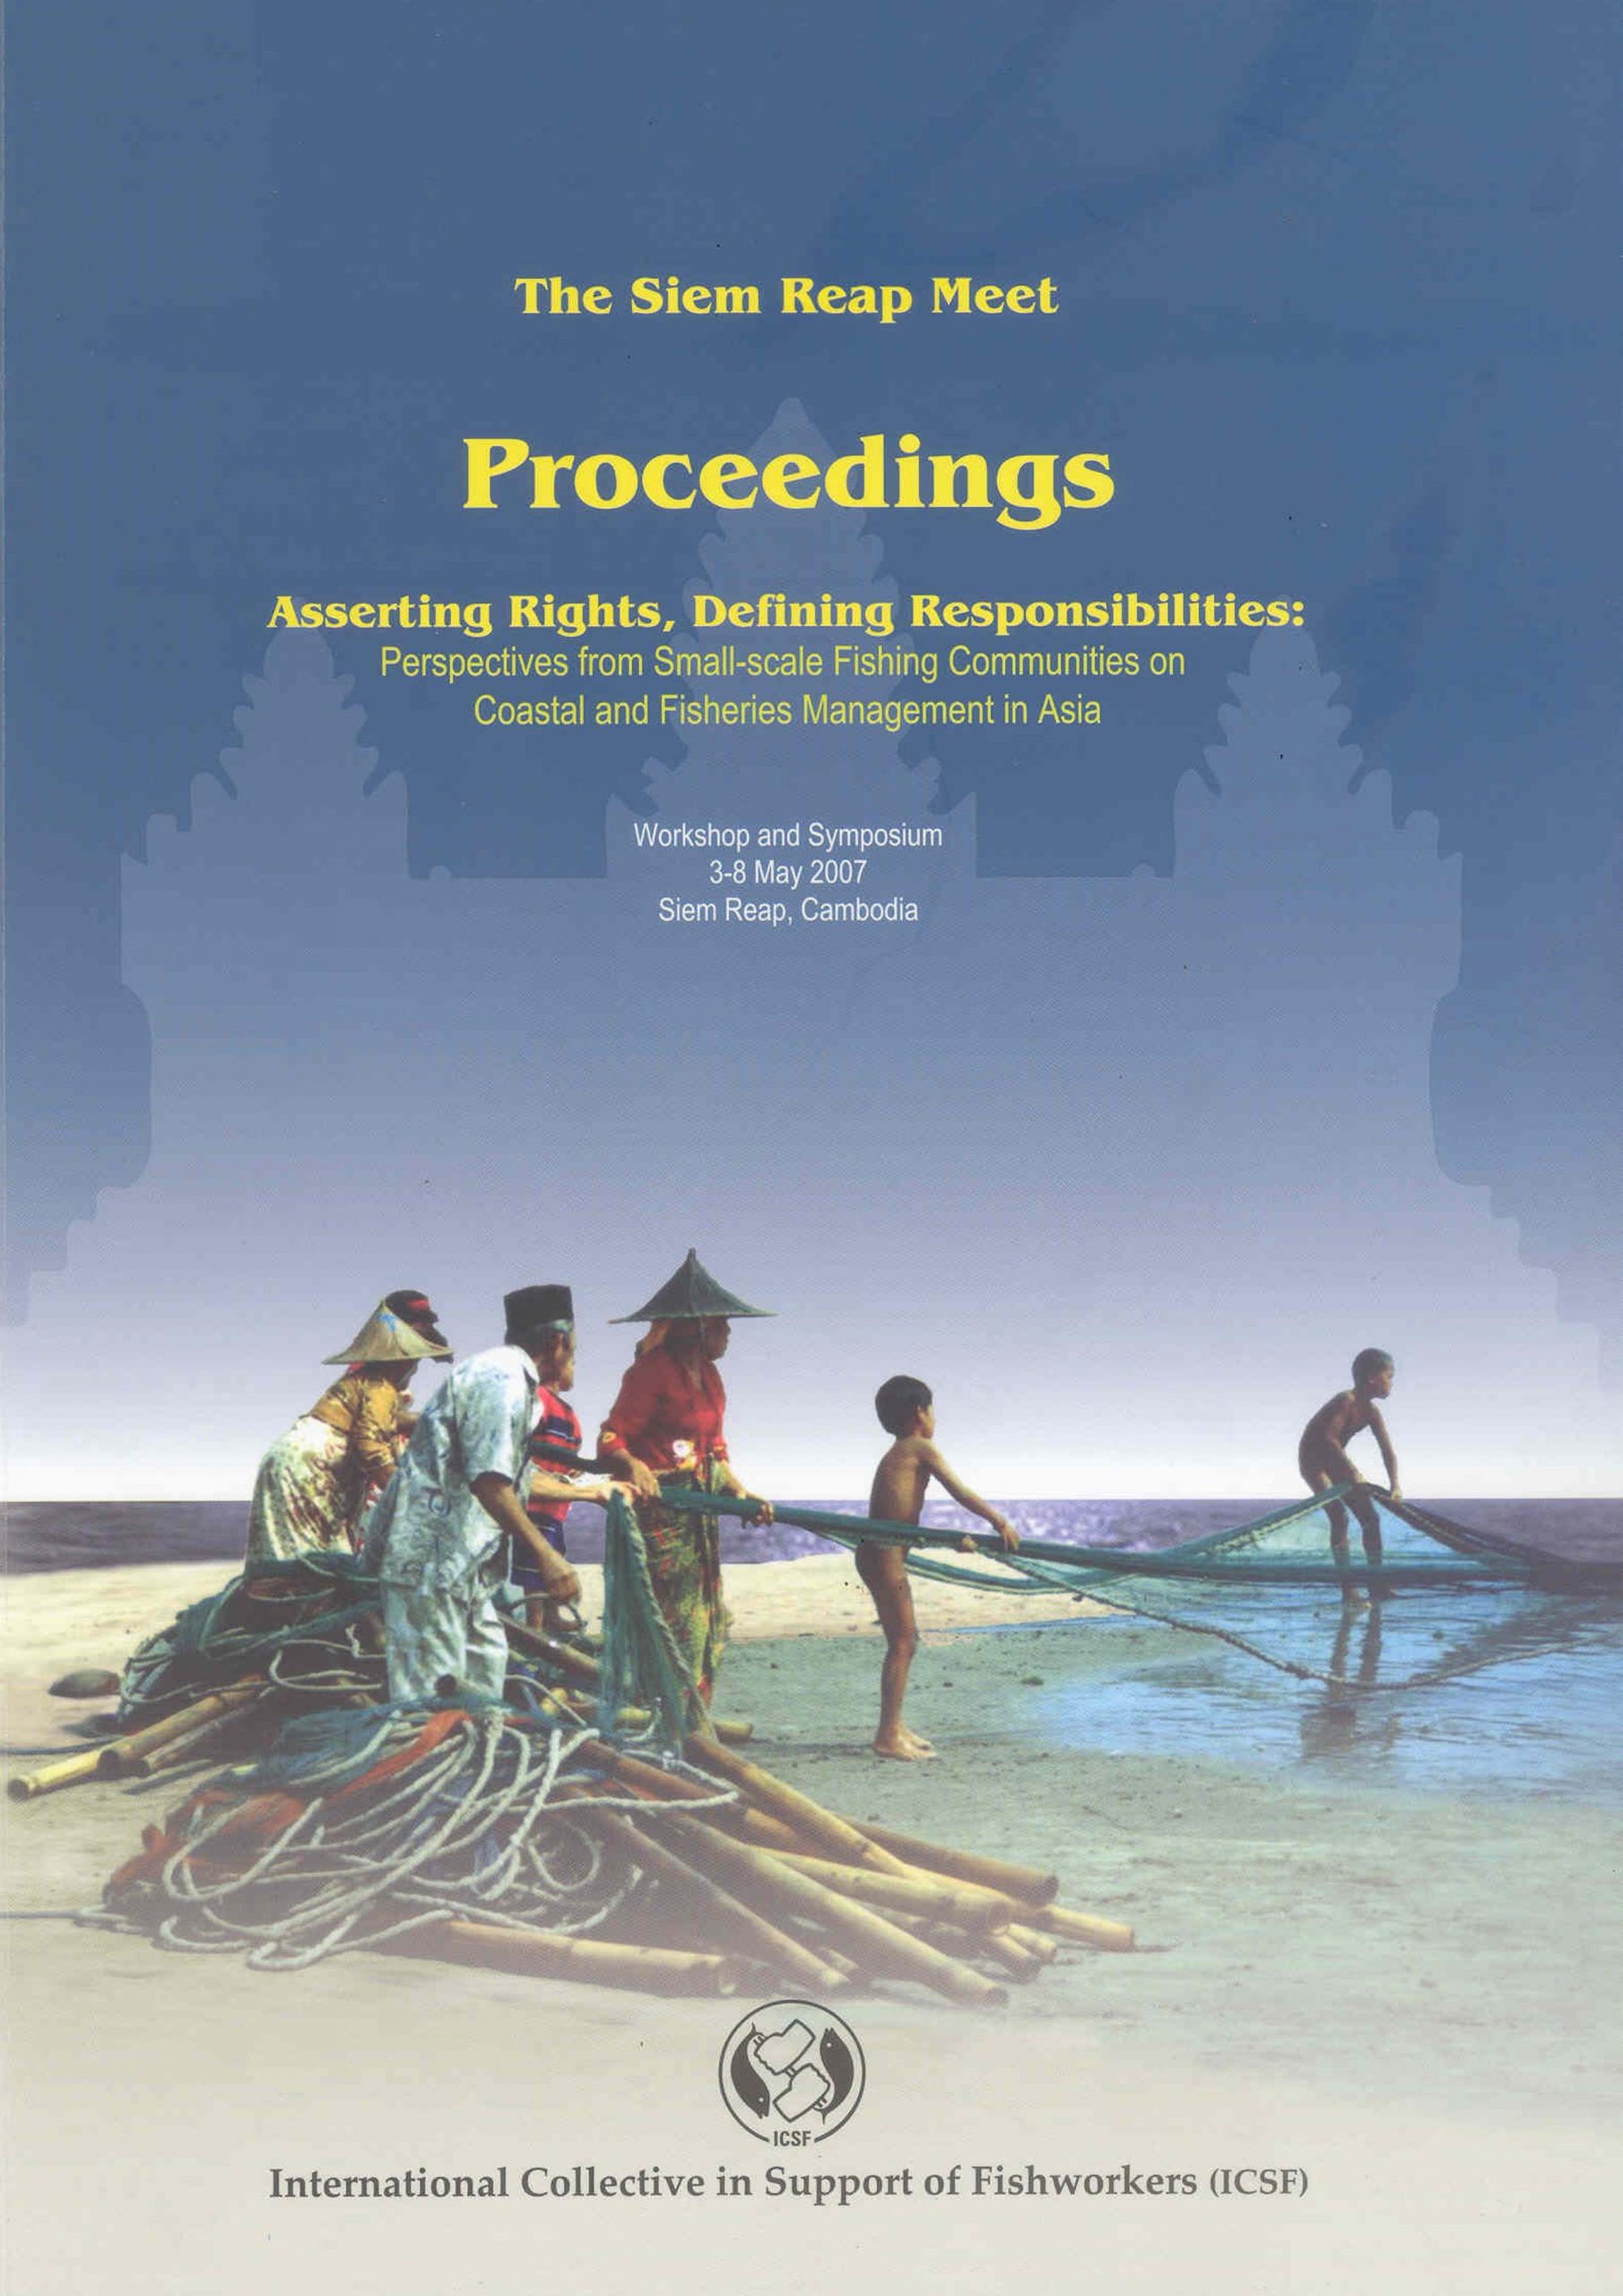 Asserting Rights, Defining Responsibilities: Perspectives from Small-scale Fishing Communities on Coastal and Fisheries Management in Asia – Workshop and Symposium proceedings, 3-8 May 2007, Siem Reap, Cambodia